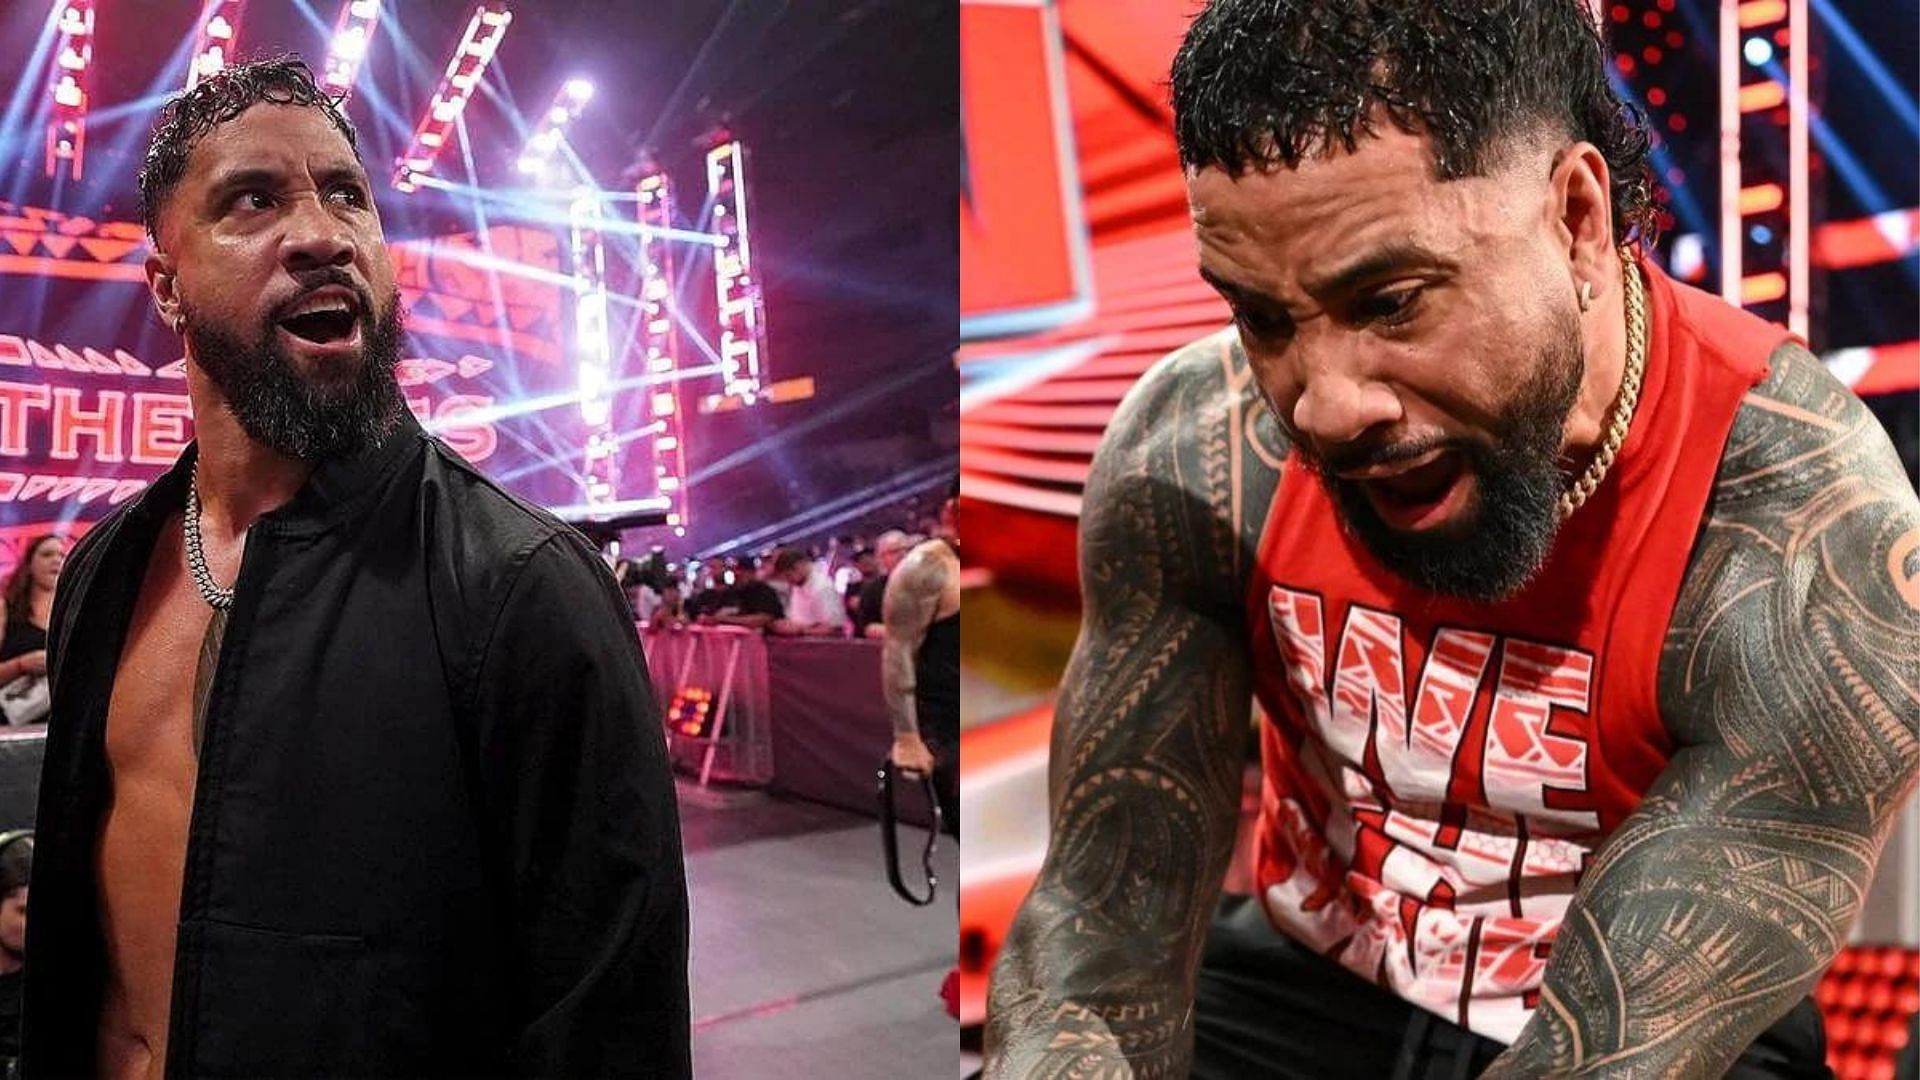 Jey Uso sent a message to Kevin Owens and Sami Zayn